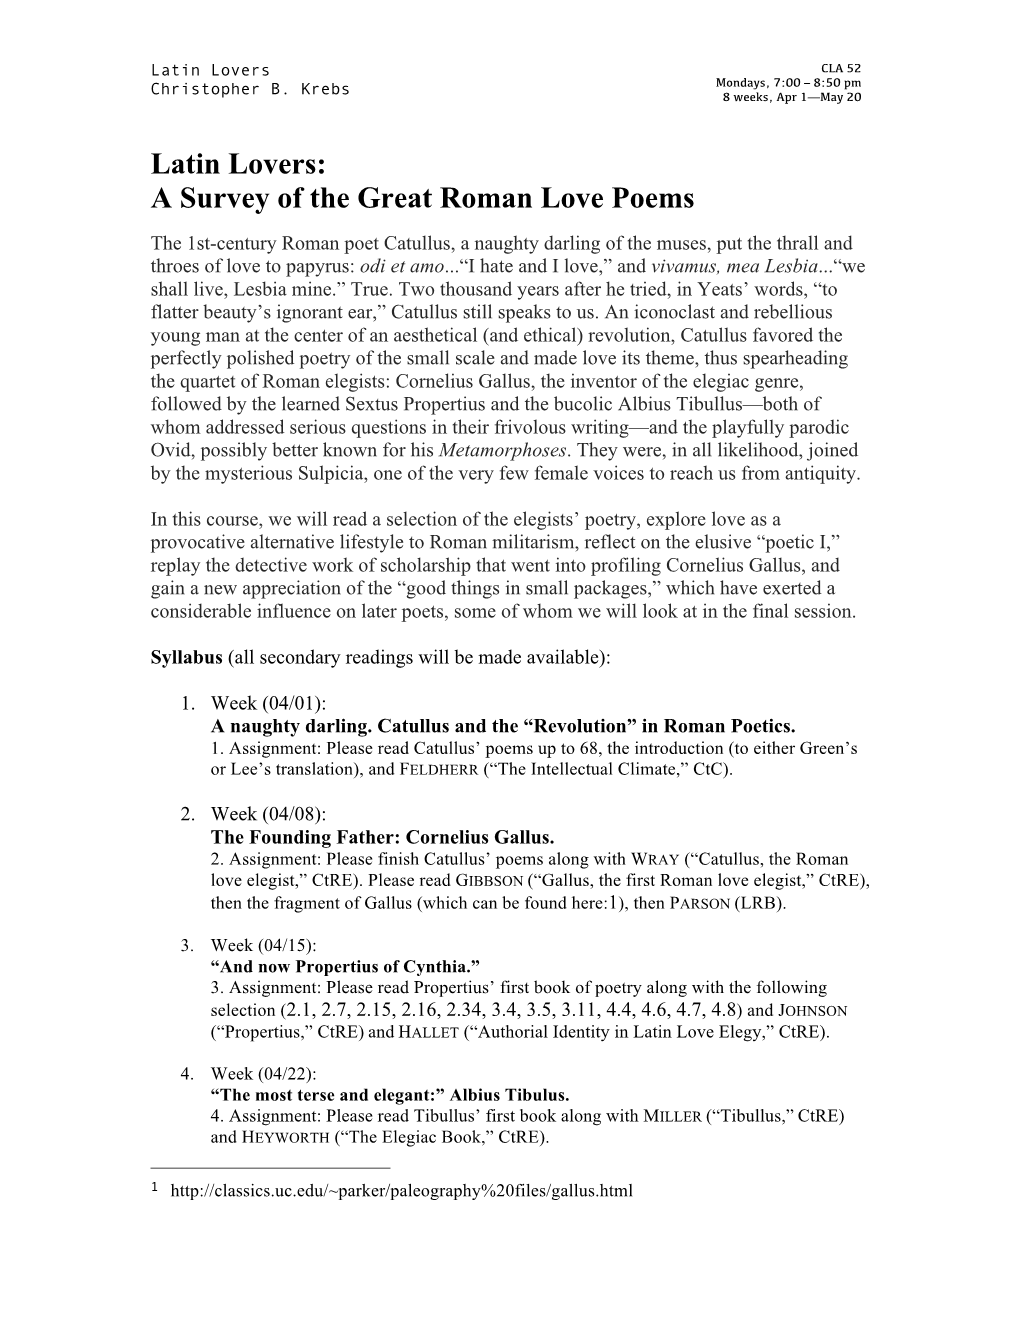 Latin Lovers: a Survey of the Great Roman Love Poems